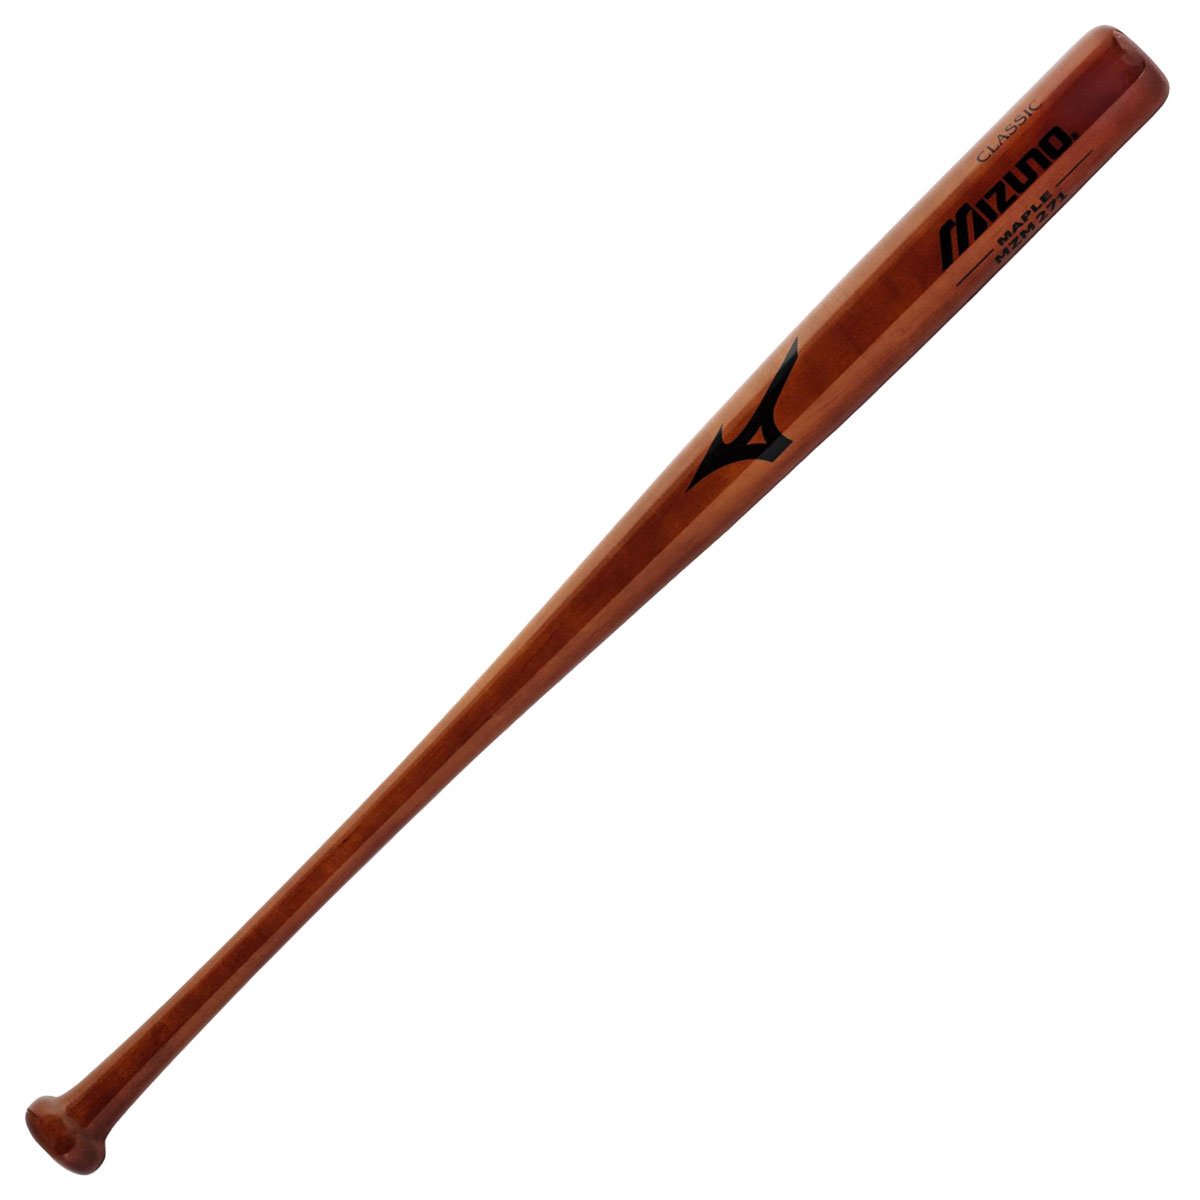 Hard Maple Hand selected wood from premium maple wood. Cupped for balanced swing weight and 2.25 Barrel Diameter approved for Little League play. Little League version of bat used by MLB pros